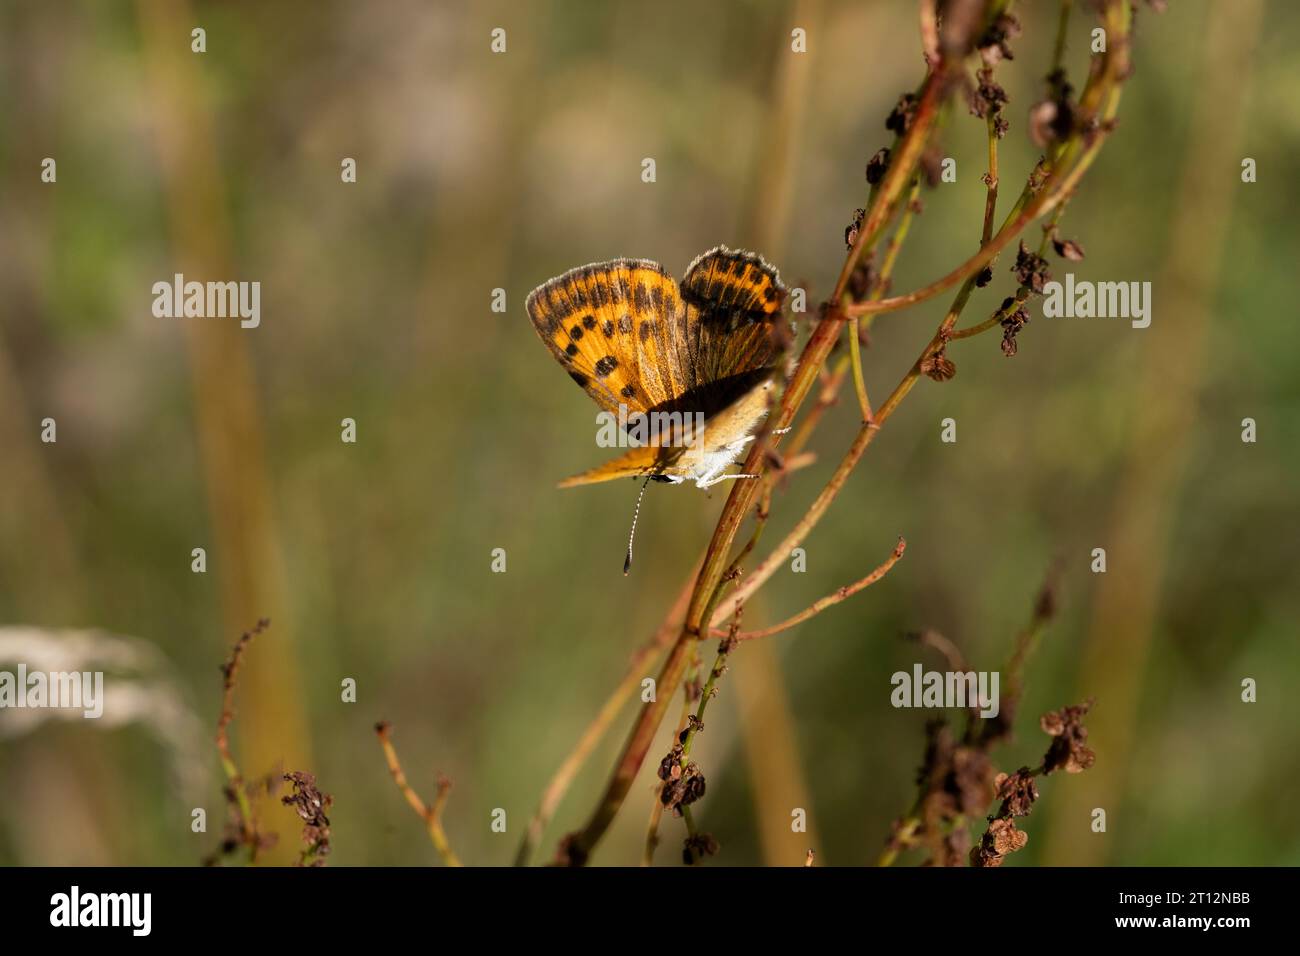 Lycaena virgaureae Family Lycaenidae Genus Lycaena Scarce copper butterfly wild nature insect photography, picture, wallpaper Stock Photo